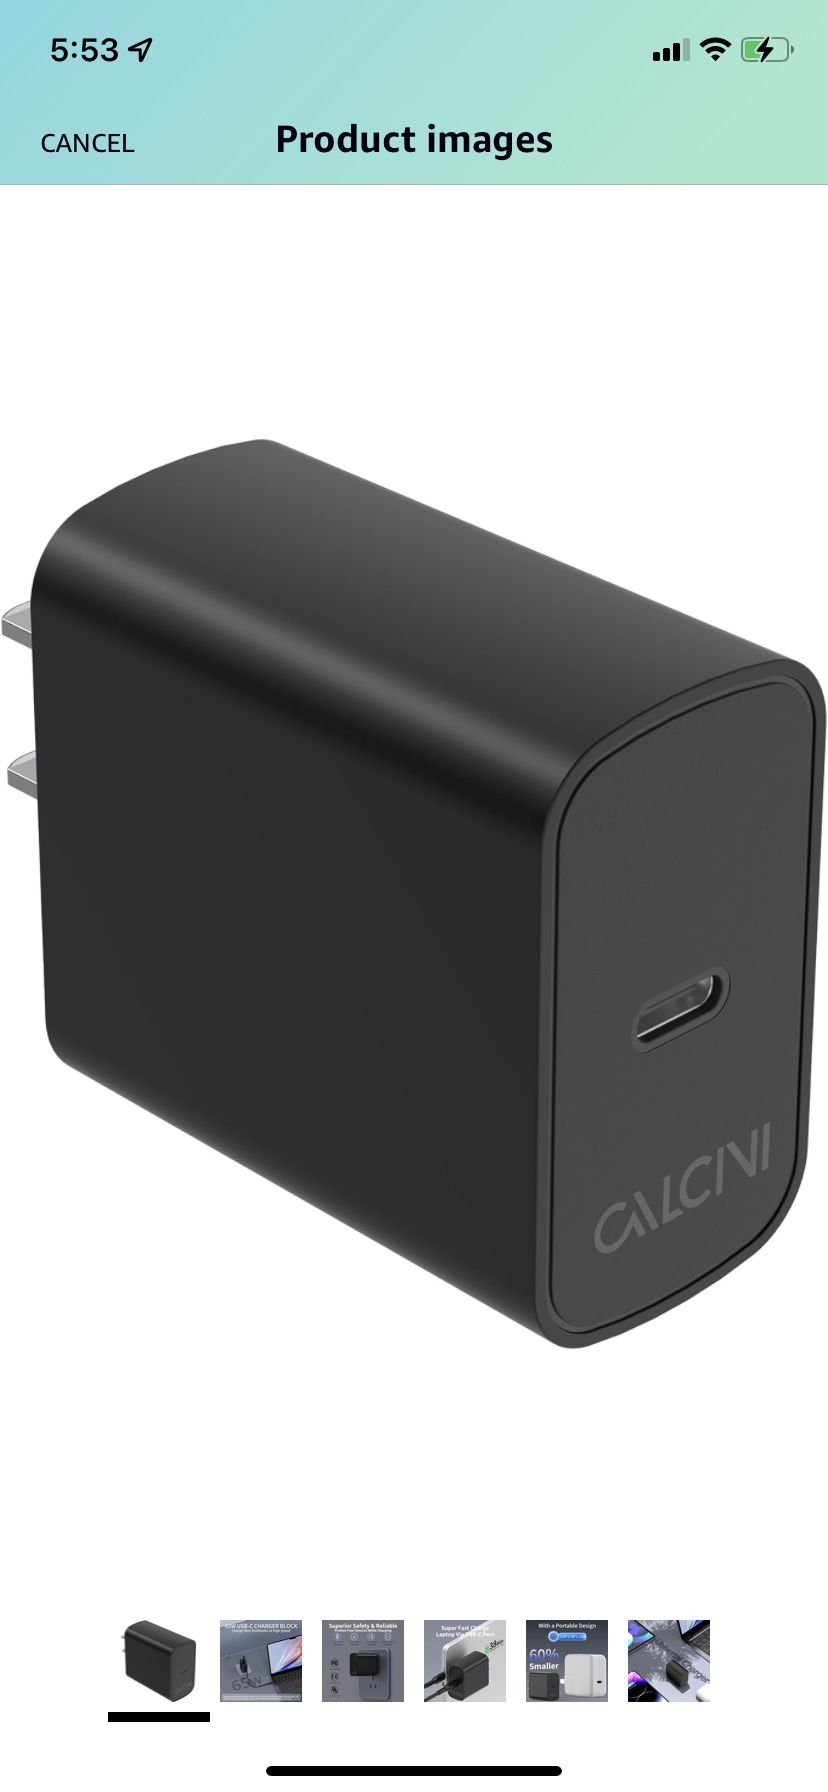 USB C Charger Block CALCINI GAN 65W PD Compact Fast Type C Wall Charger, for Laptop Charger Power Adapter MacBook Pro/Air, Galaxy S23/S22, Dell XPS13,